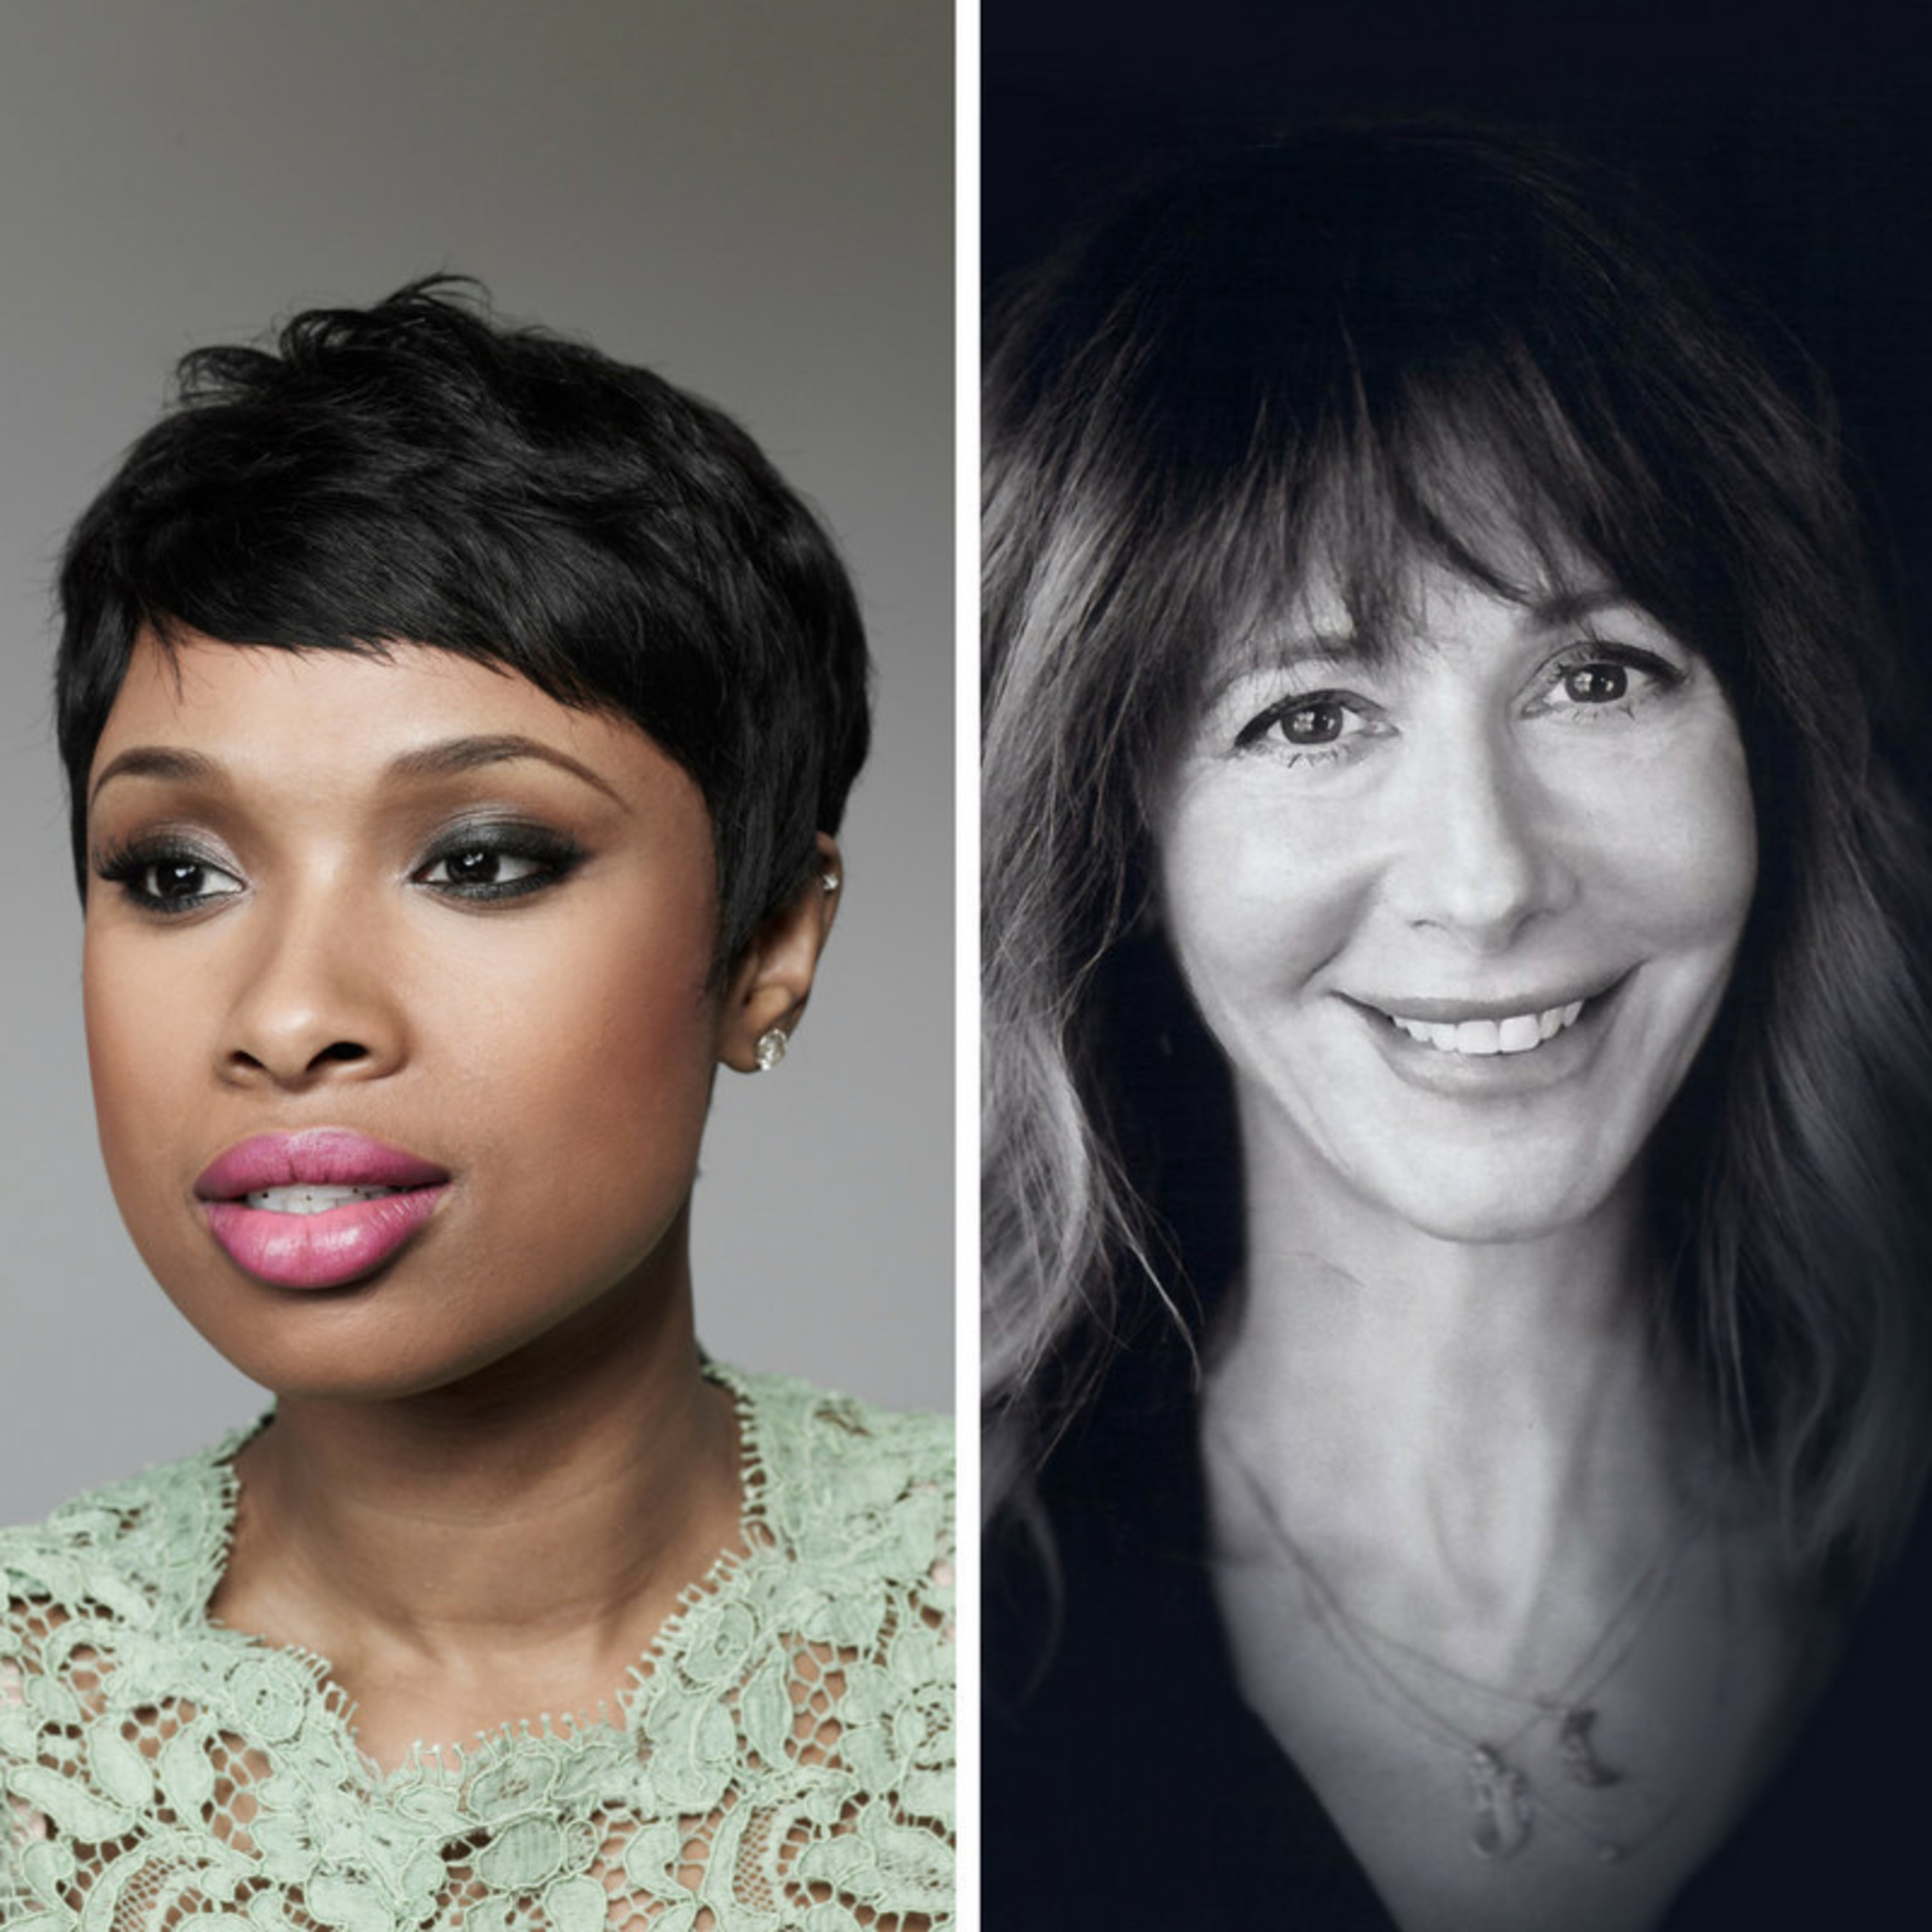 March of Dimes announces Grammy and Academy-Award winner Jennifer Hudson and Chairman & CEO of Universal Music Publishing Group Jody Gerson as 2016 honorees for the sixth annual March of Dimes Celebration of Babies(R): A Hollywood Luncheon, taking place December 9th at the Beverly Wilshire Hotel in Los Angeles. (Jennifer Hudson's photo courtesy of Chris Floyd; photo agency Camera Press.)